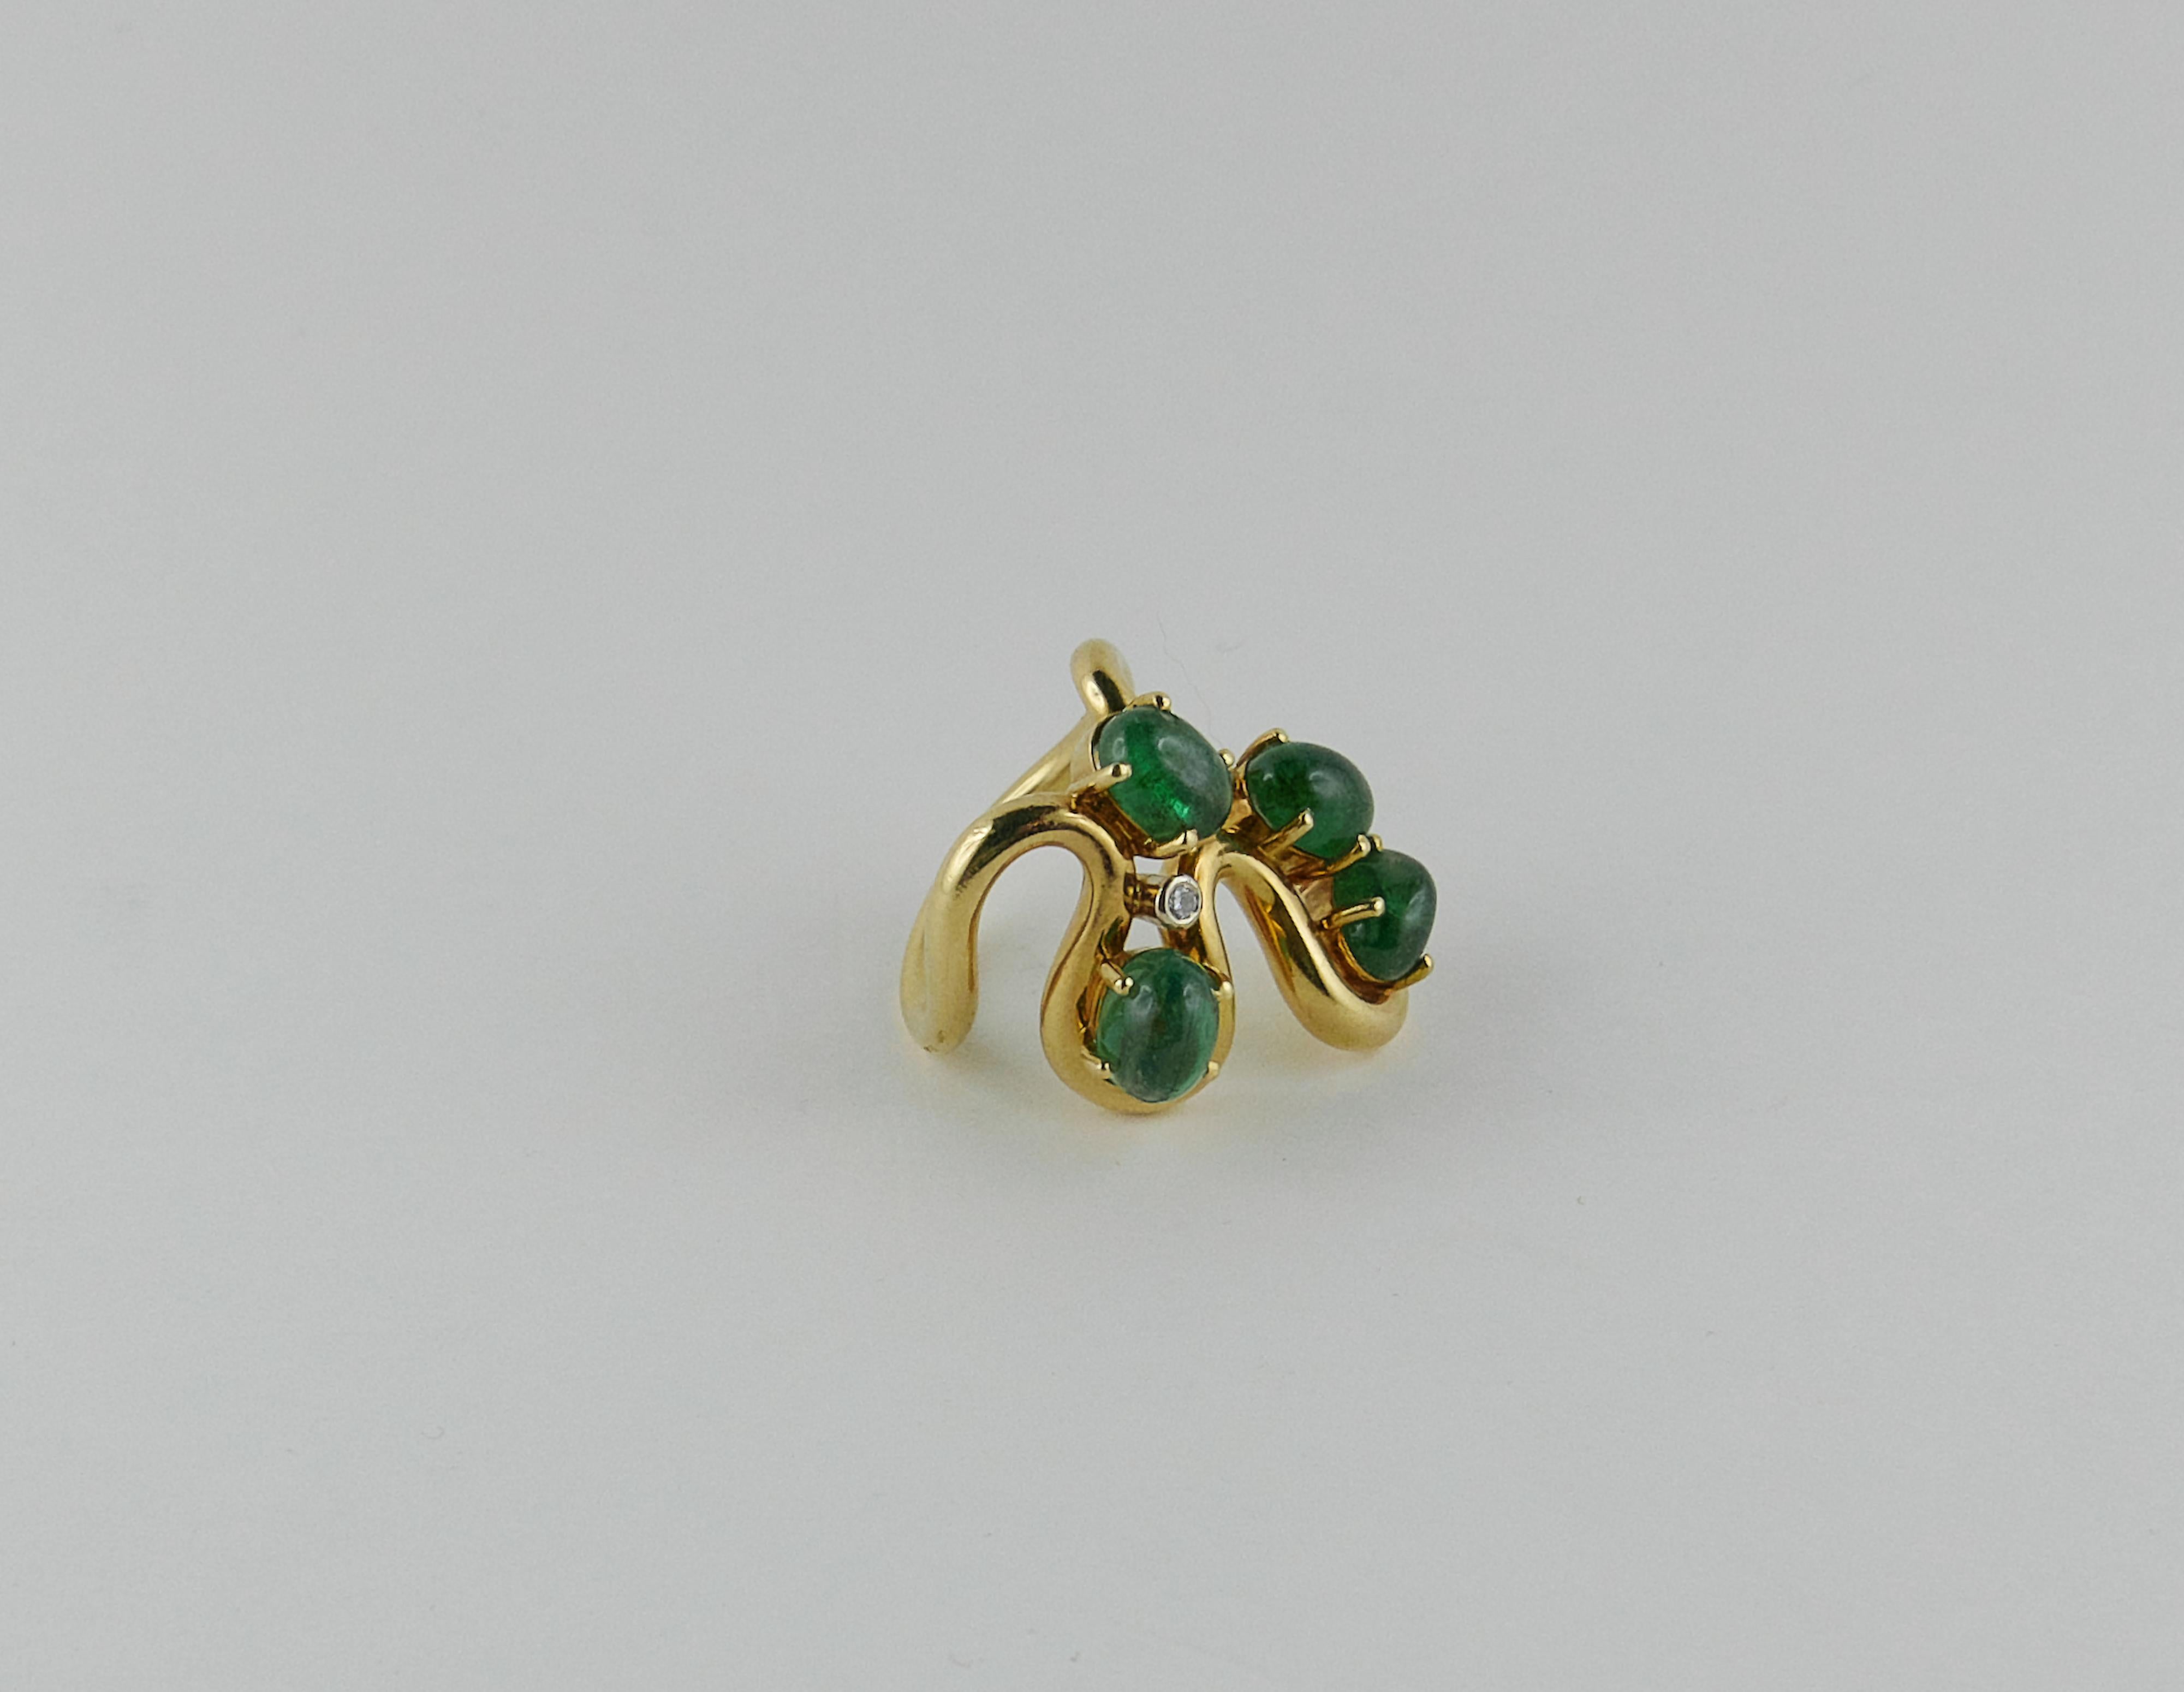 Unique and elegant 1970s Italian Yellow Gold and Emerald Ring crafted in the 1970s by Enrico Cirio: an italian  visionary artist, known abroad and in Italy and  appreciated for his extraordinary imagination. Born in 1932 to a family of master